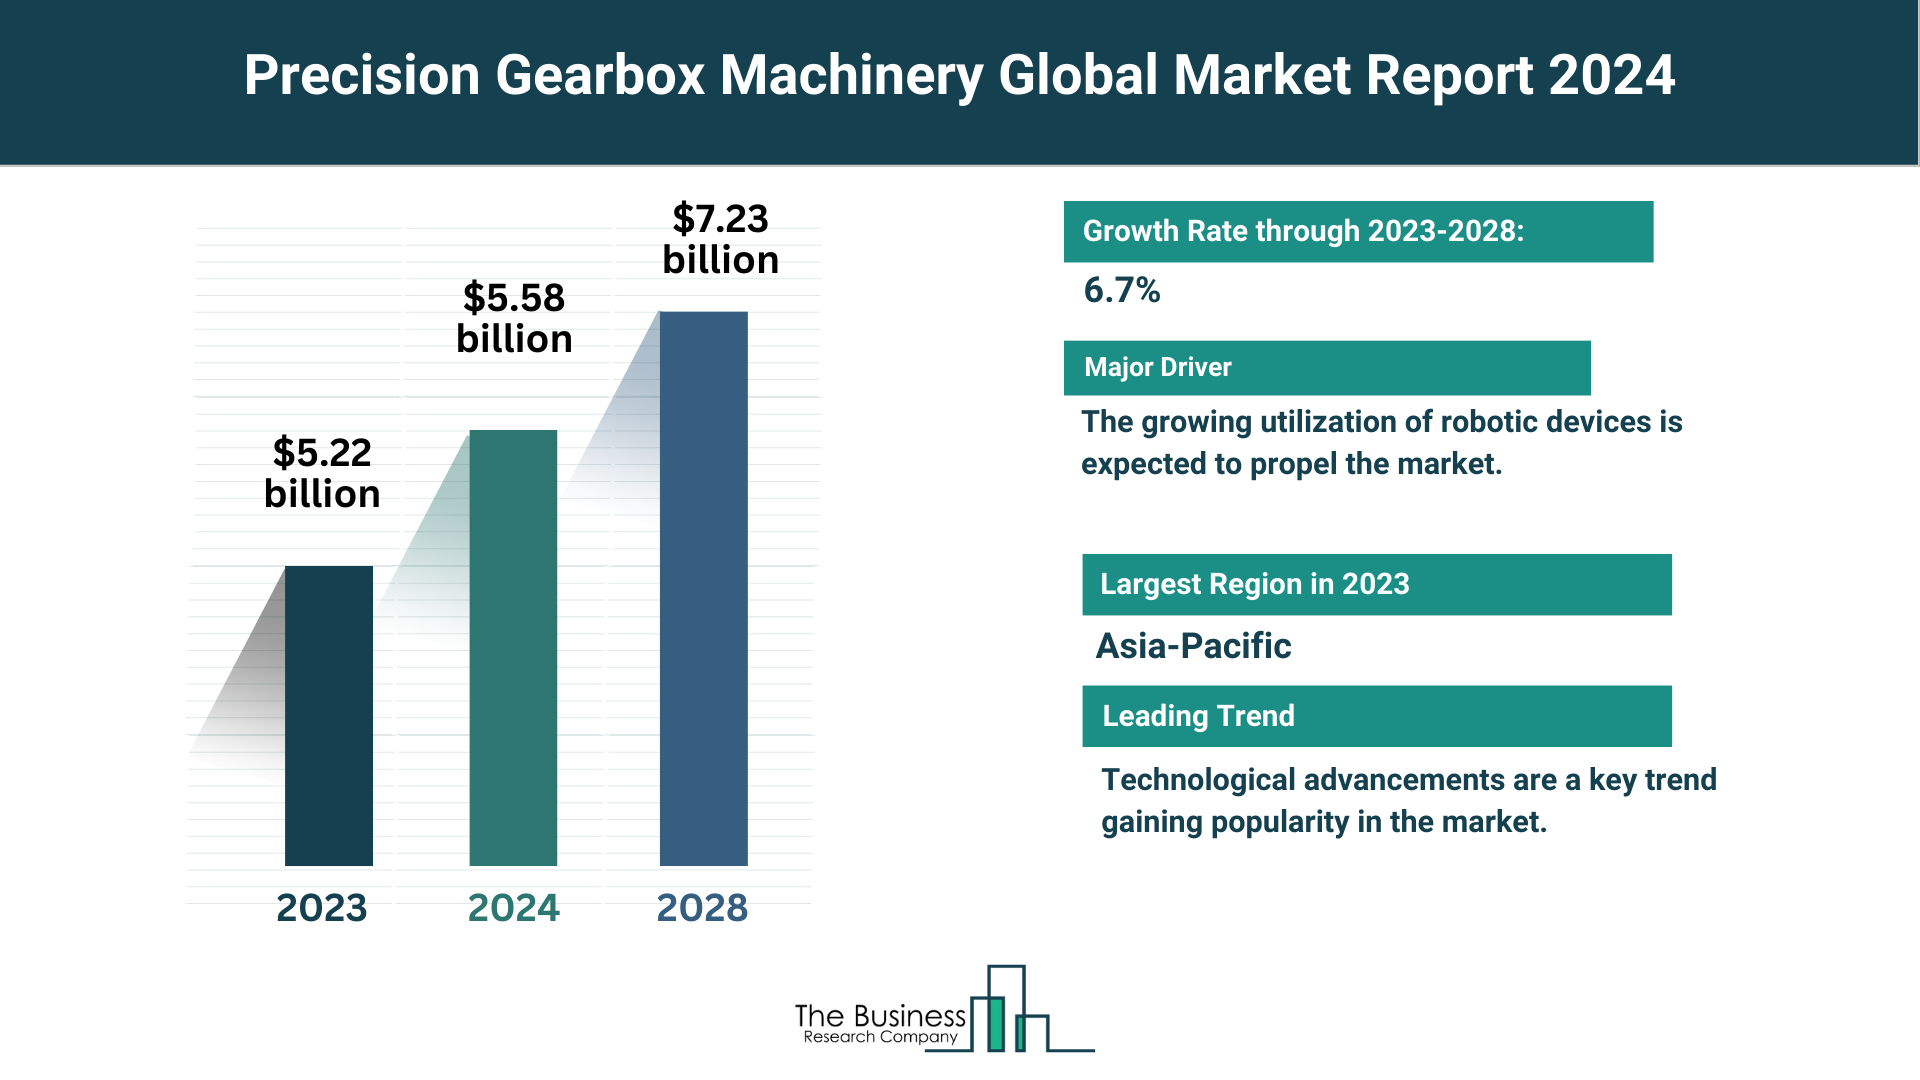 Global Precision Gearbox Machinery Market